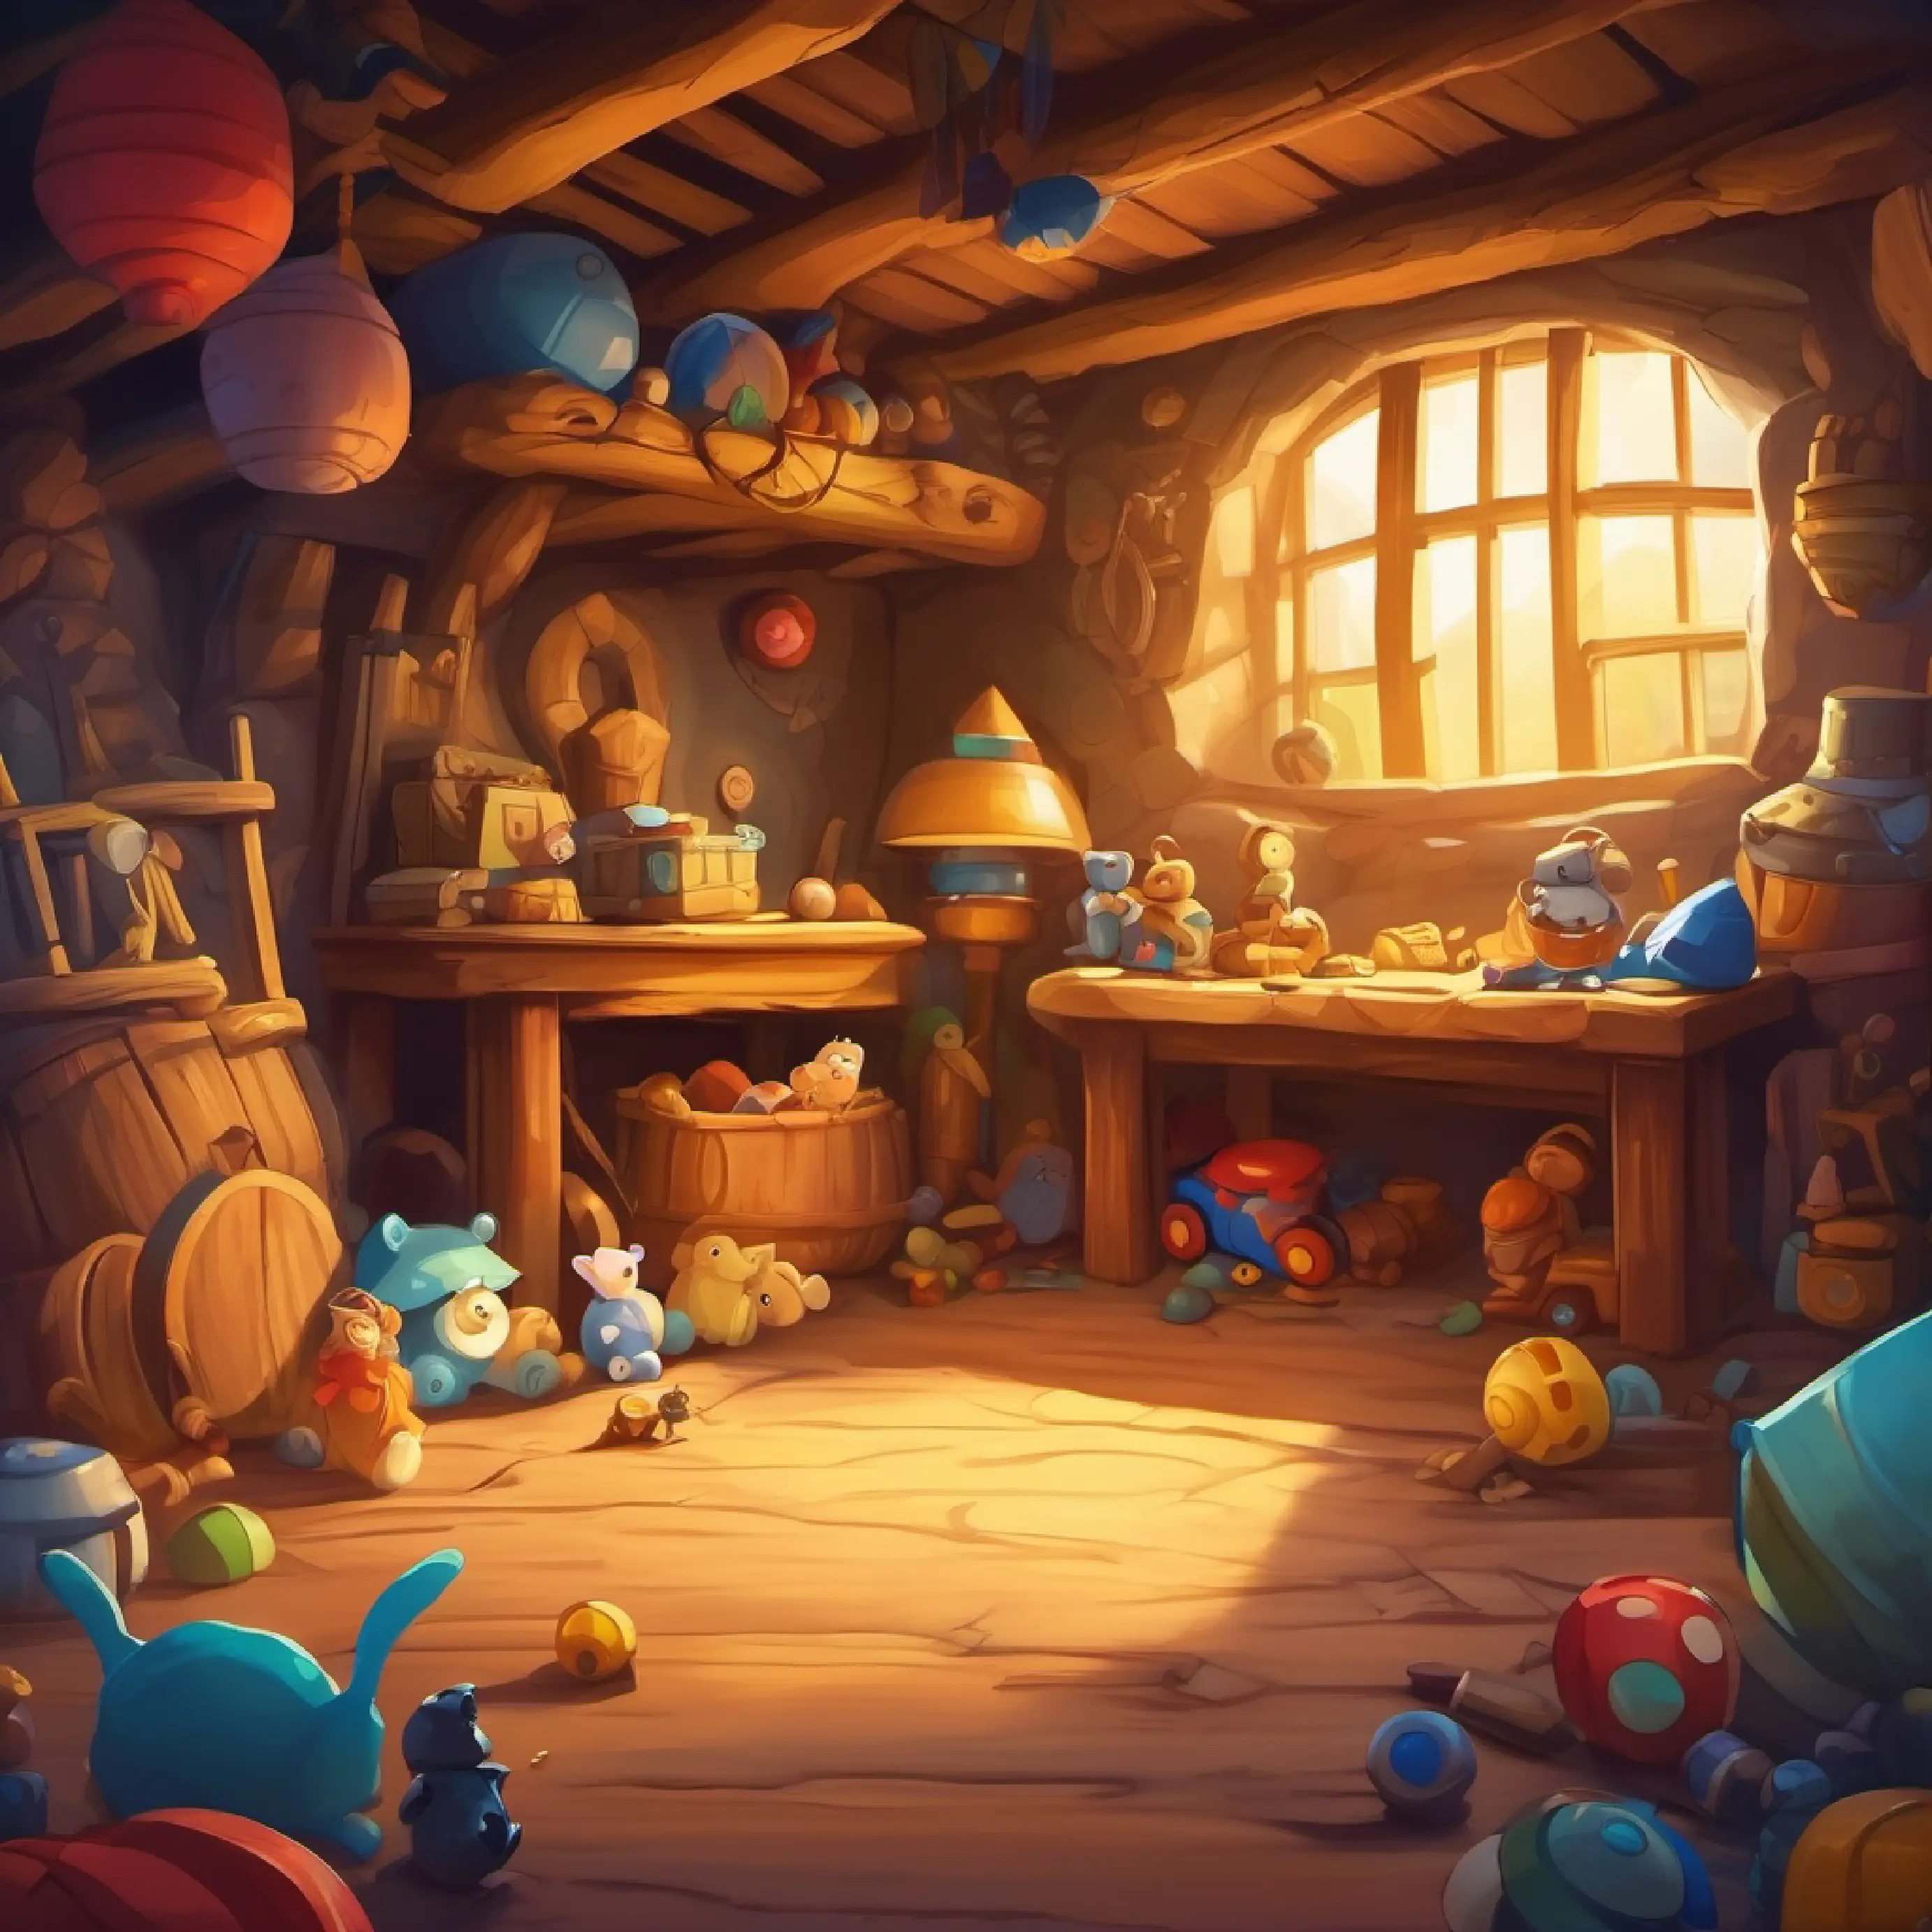 A room full of toys is discovered, the treasure of the cave.